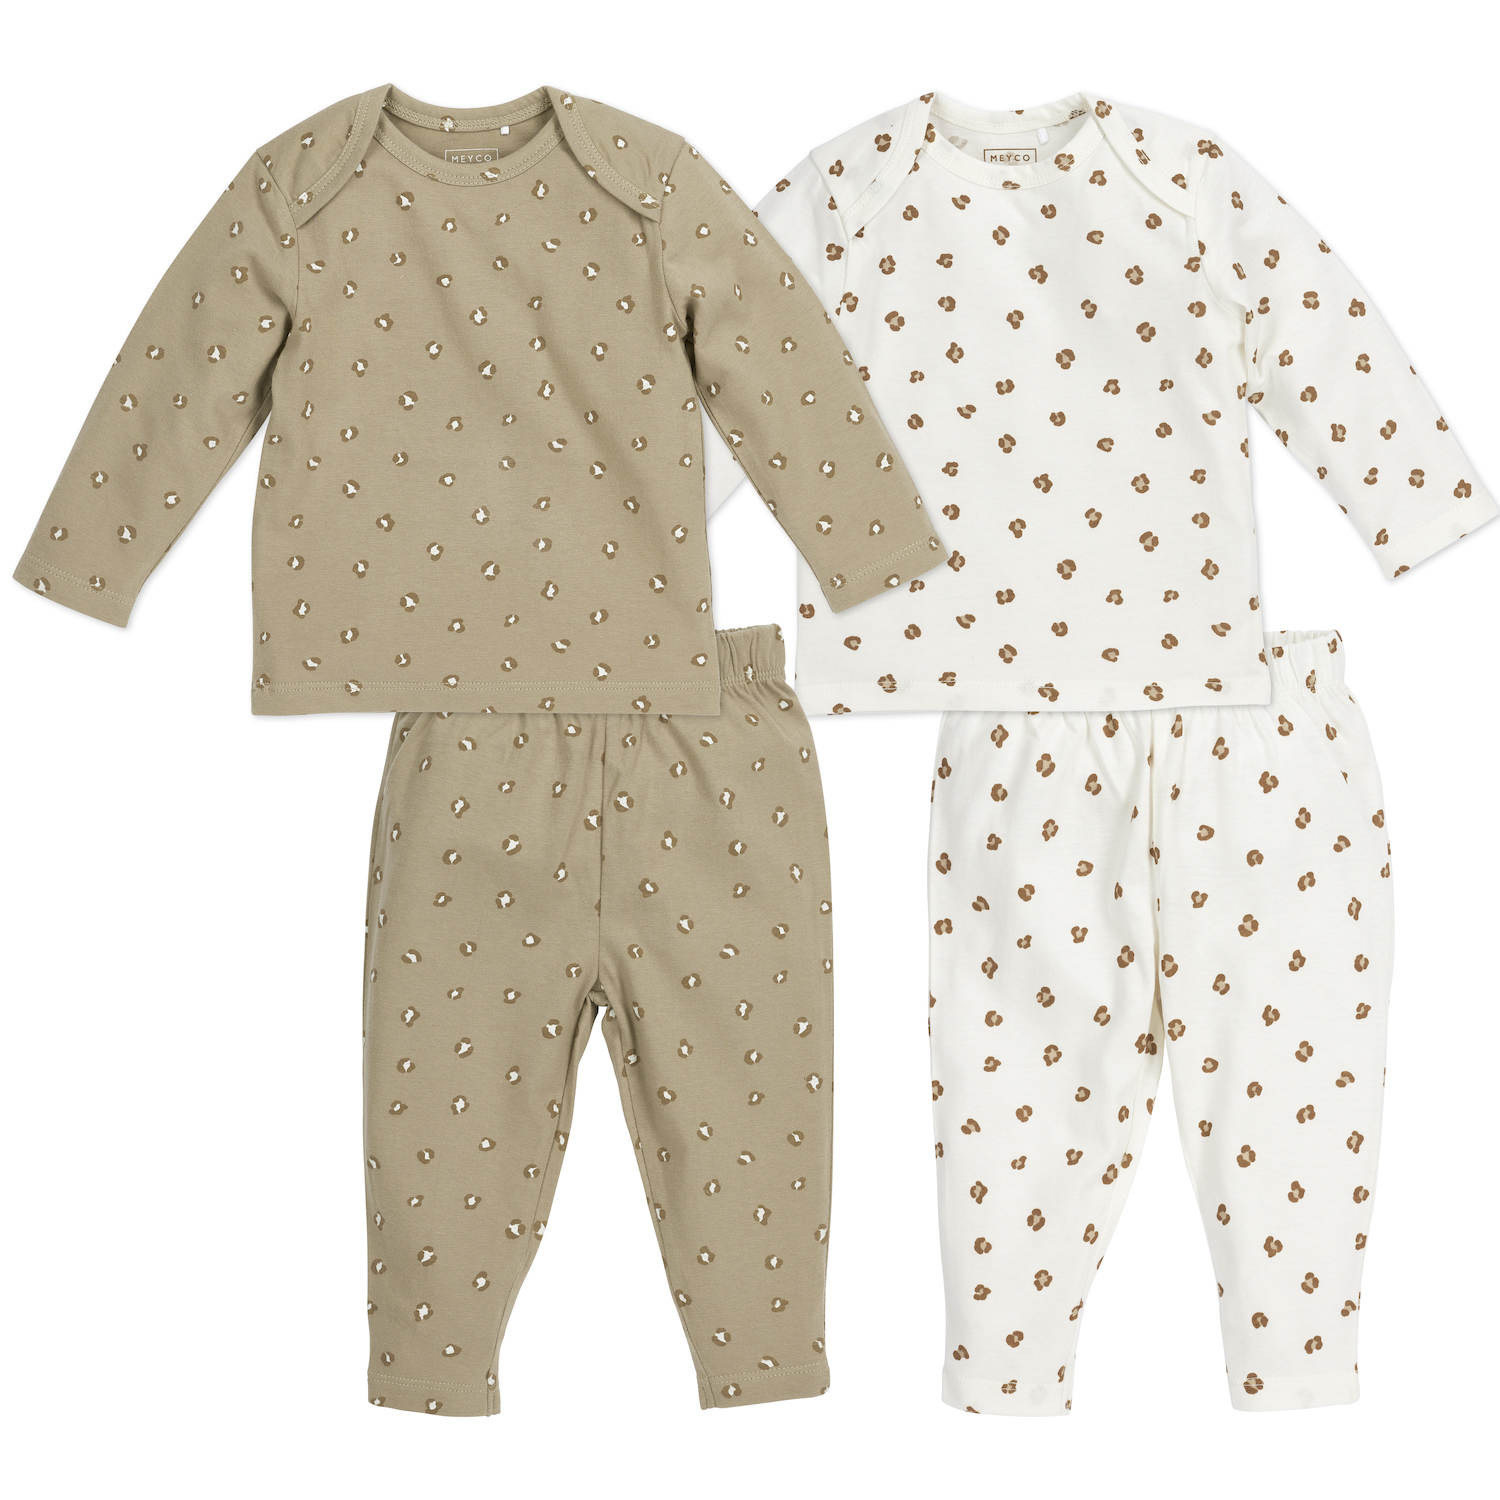 Baby pajamas 2-pack Mini Panther - Offwhite/Sand - Size 62/68